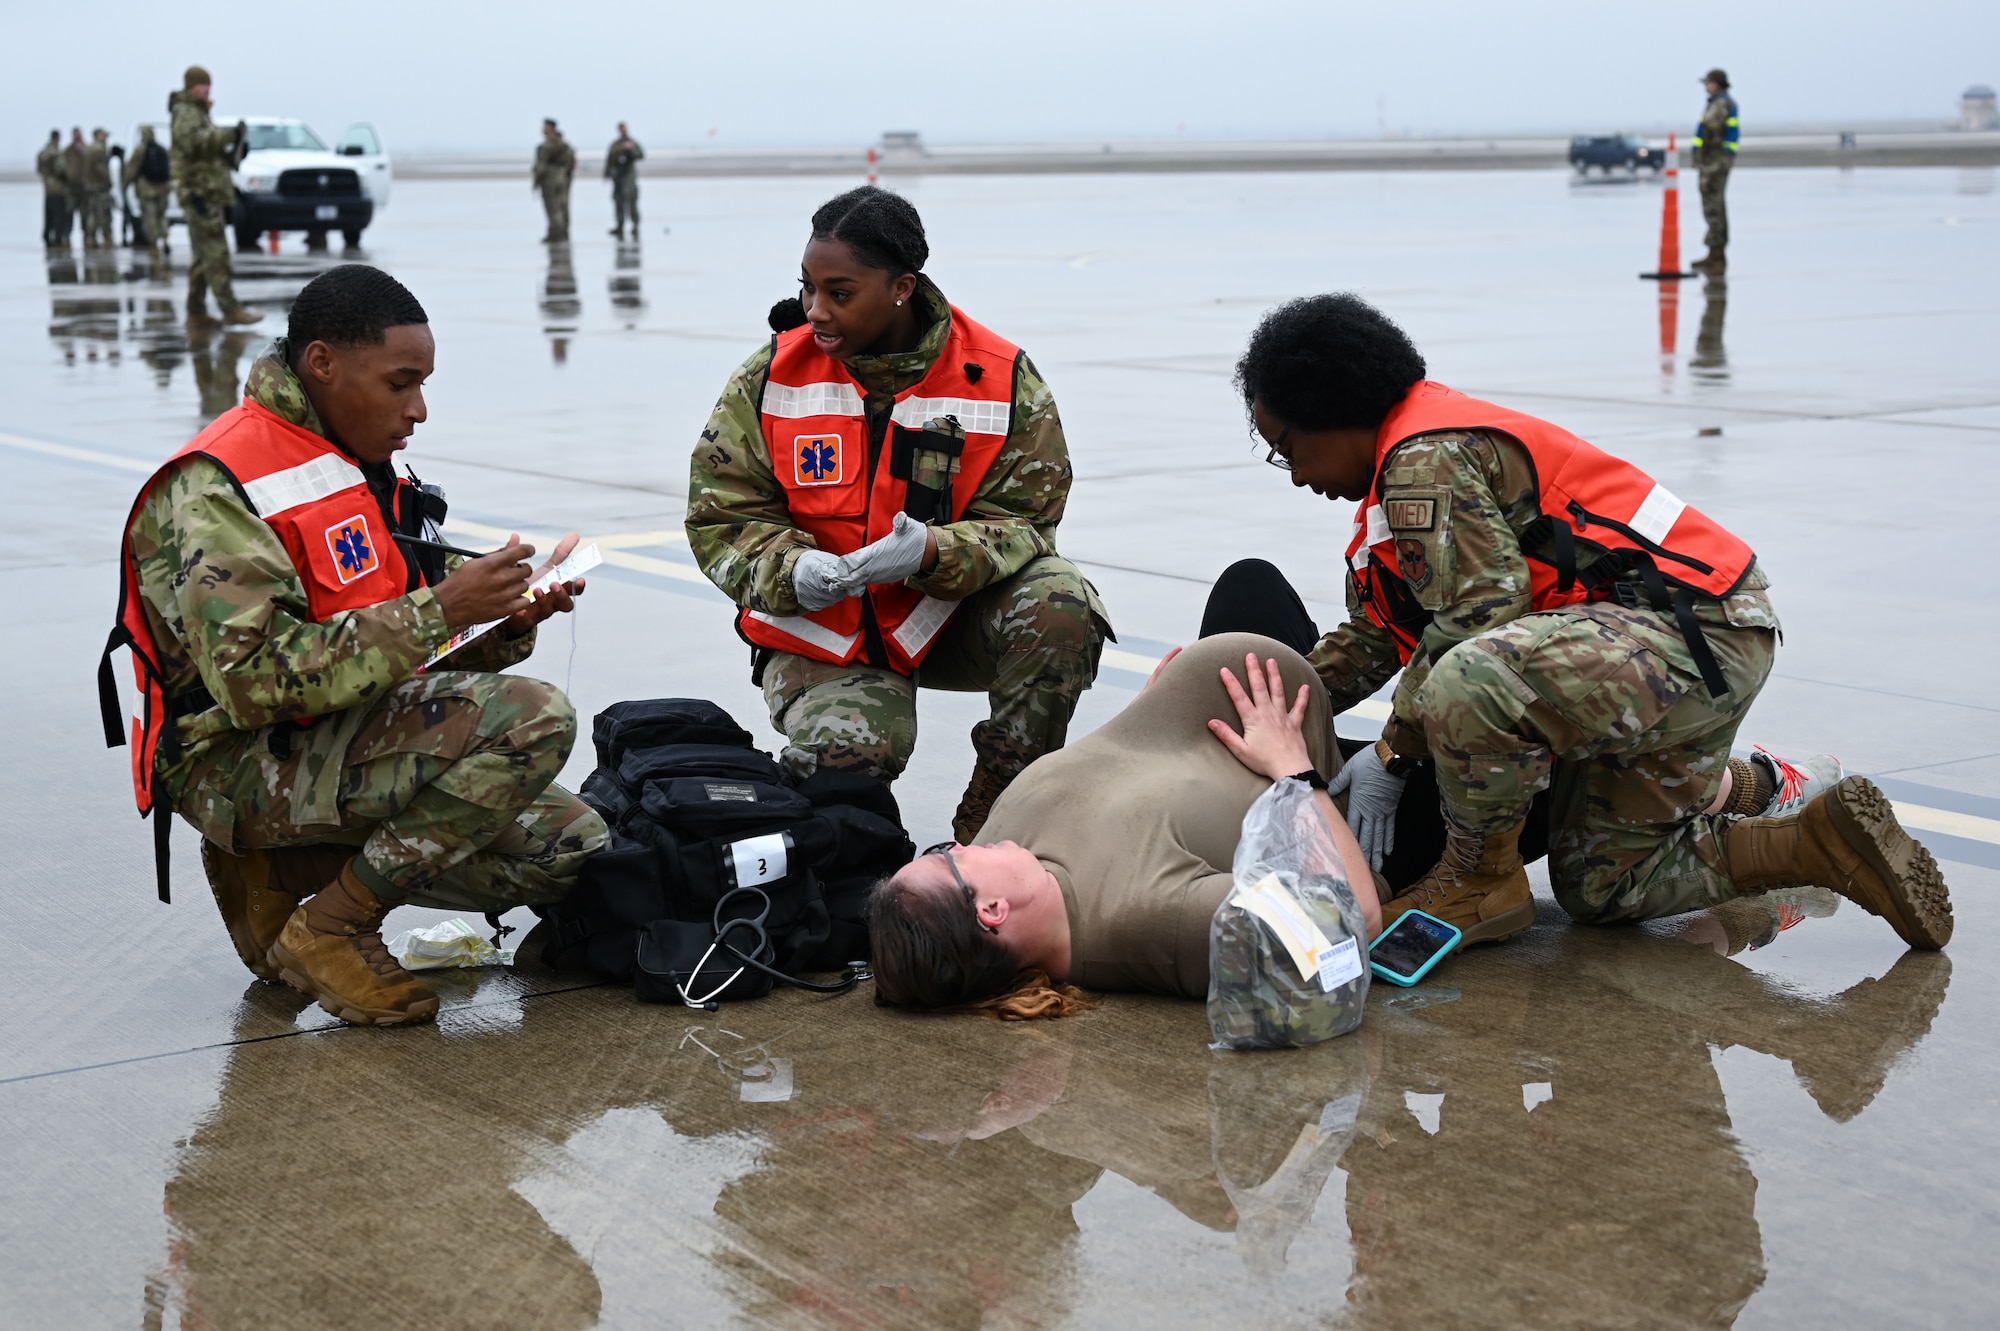 U.S. Air Force Airmen from the 47th Medical Group treat a simulated pregnant woman during a Major Accident Response Exercise (MARE) on the flight line at Laughlin Air Force Base, Texas, Dec. 14, 2023